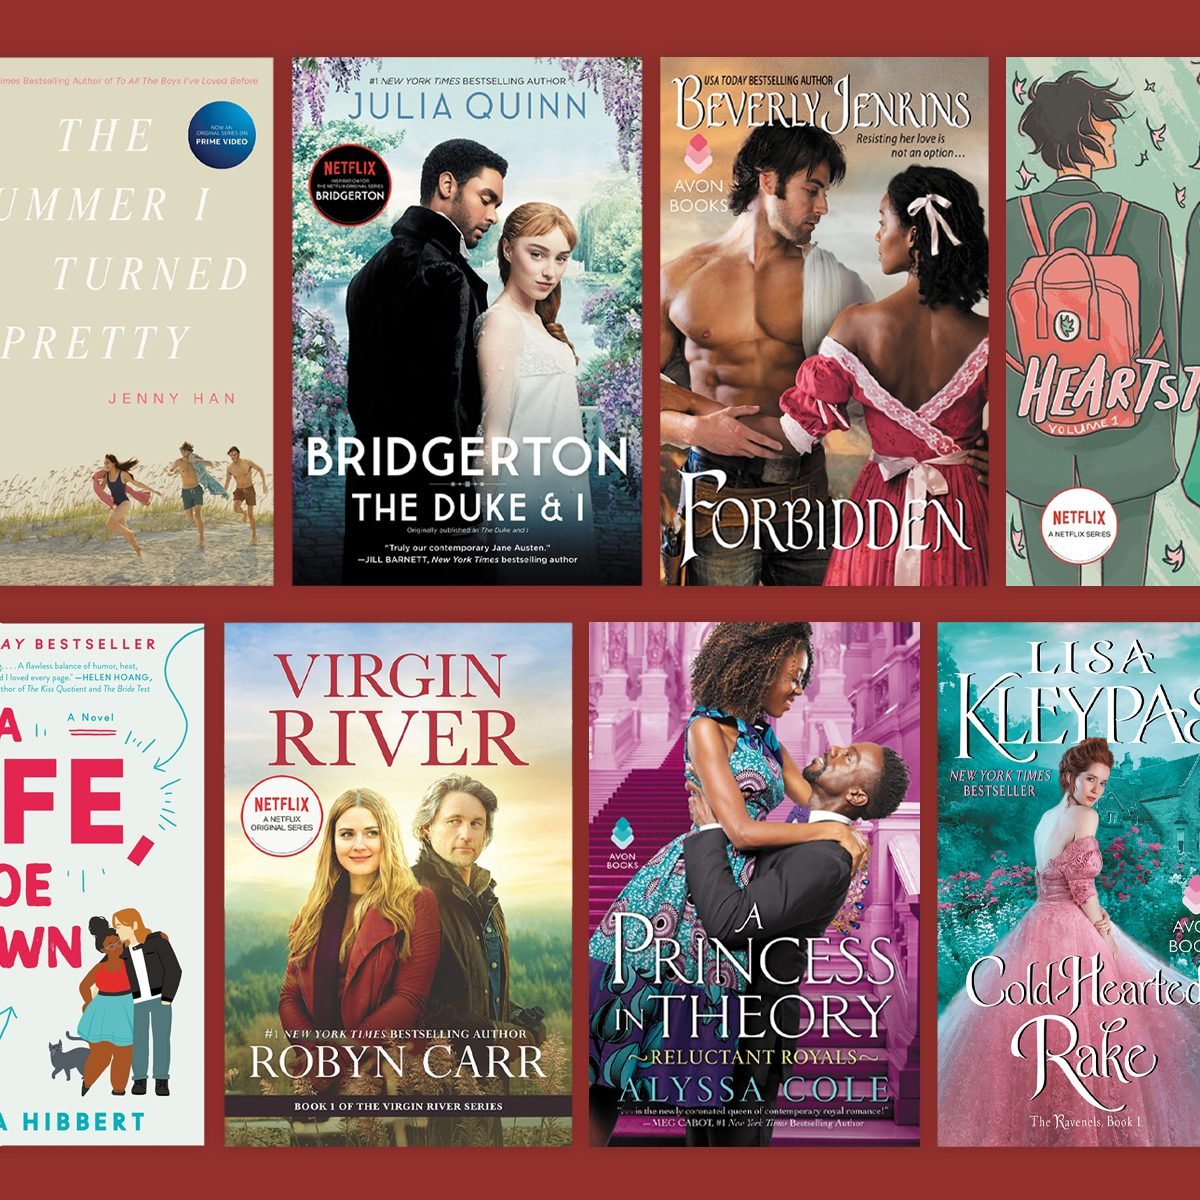 Romance Books to Movies and TV 2022: What to Watch This Year – She Reads  Romance Books